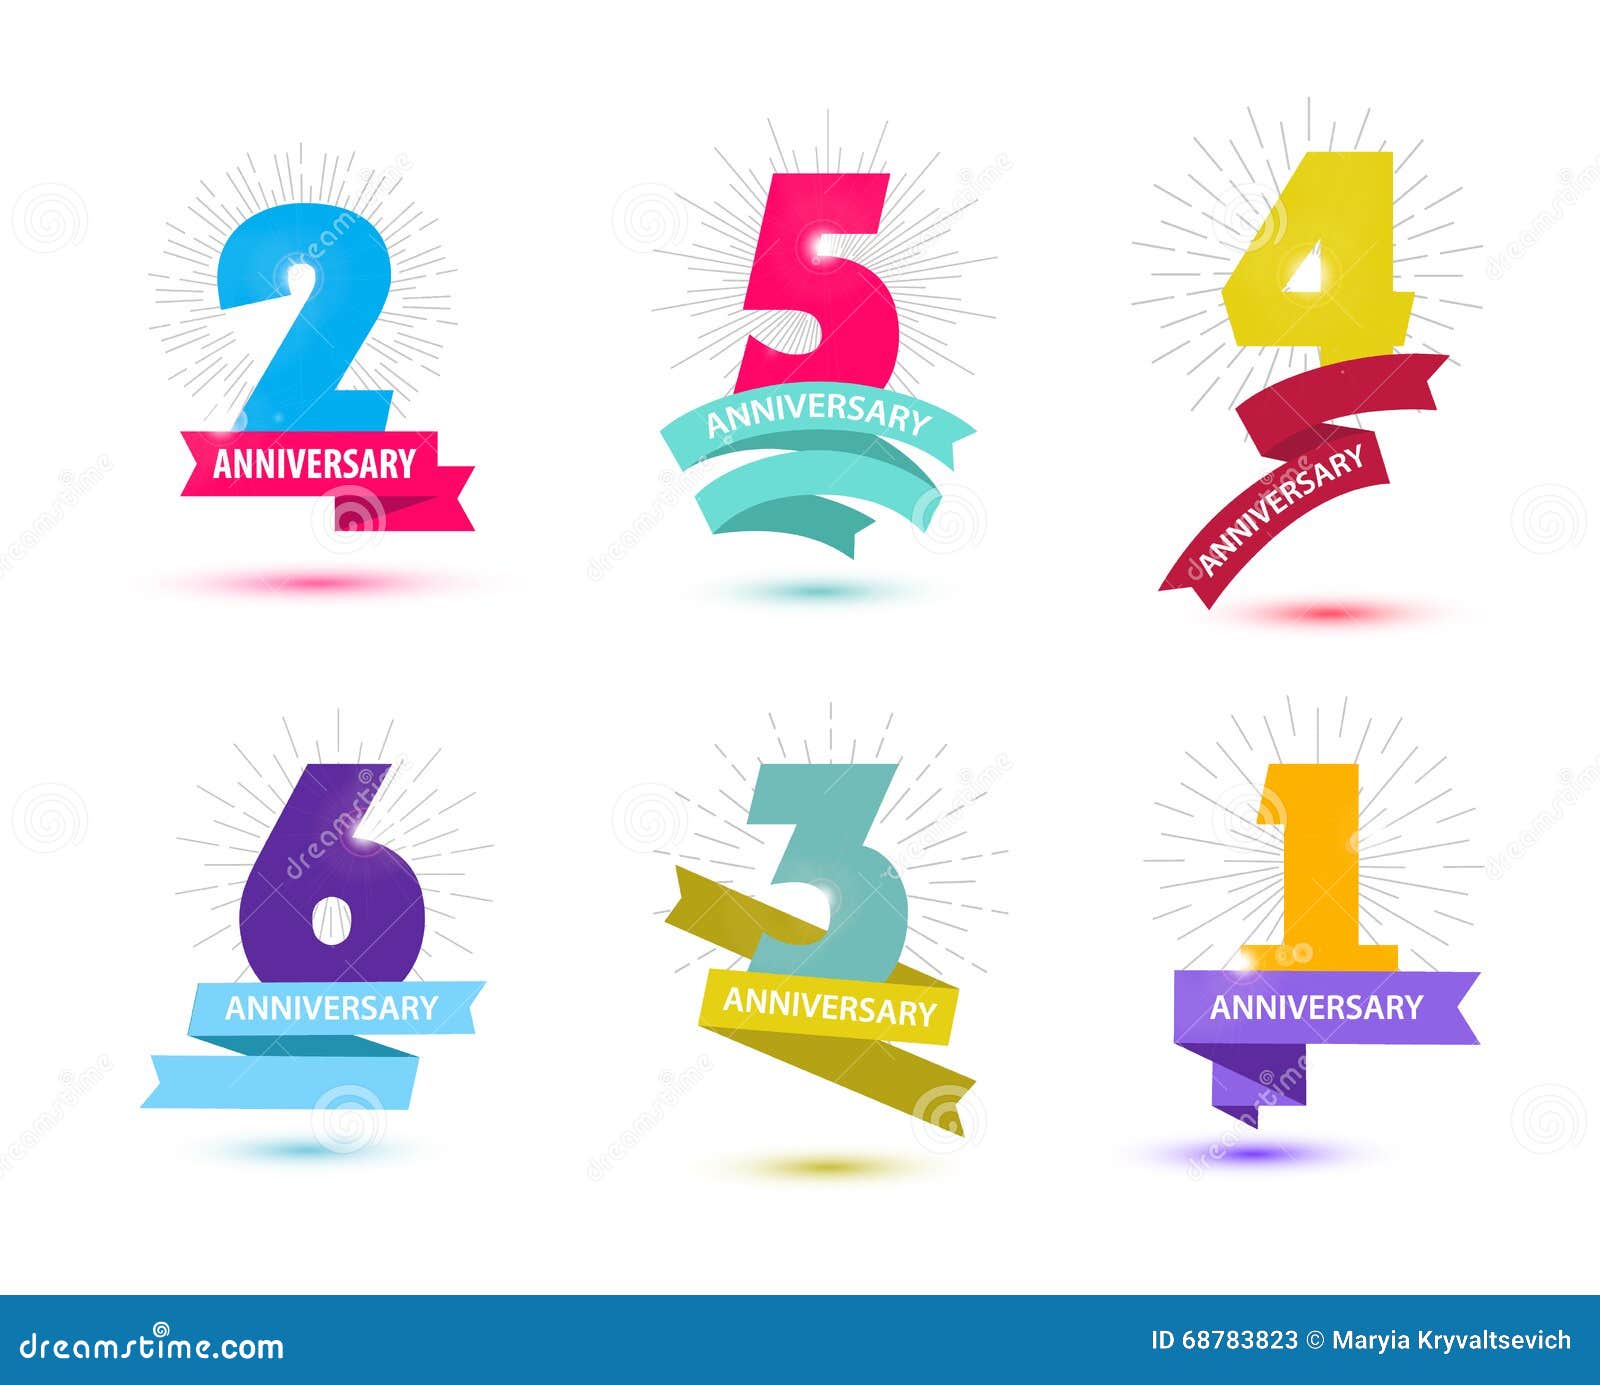 Vector Set Of Anniversary Numbers Design 1 2 3 4 5 6 Icons Compositions With Ribbons Illustration 6873 Megapixl